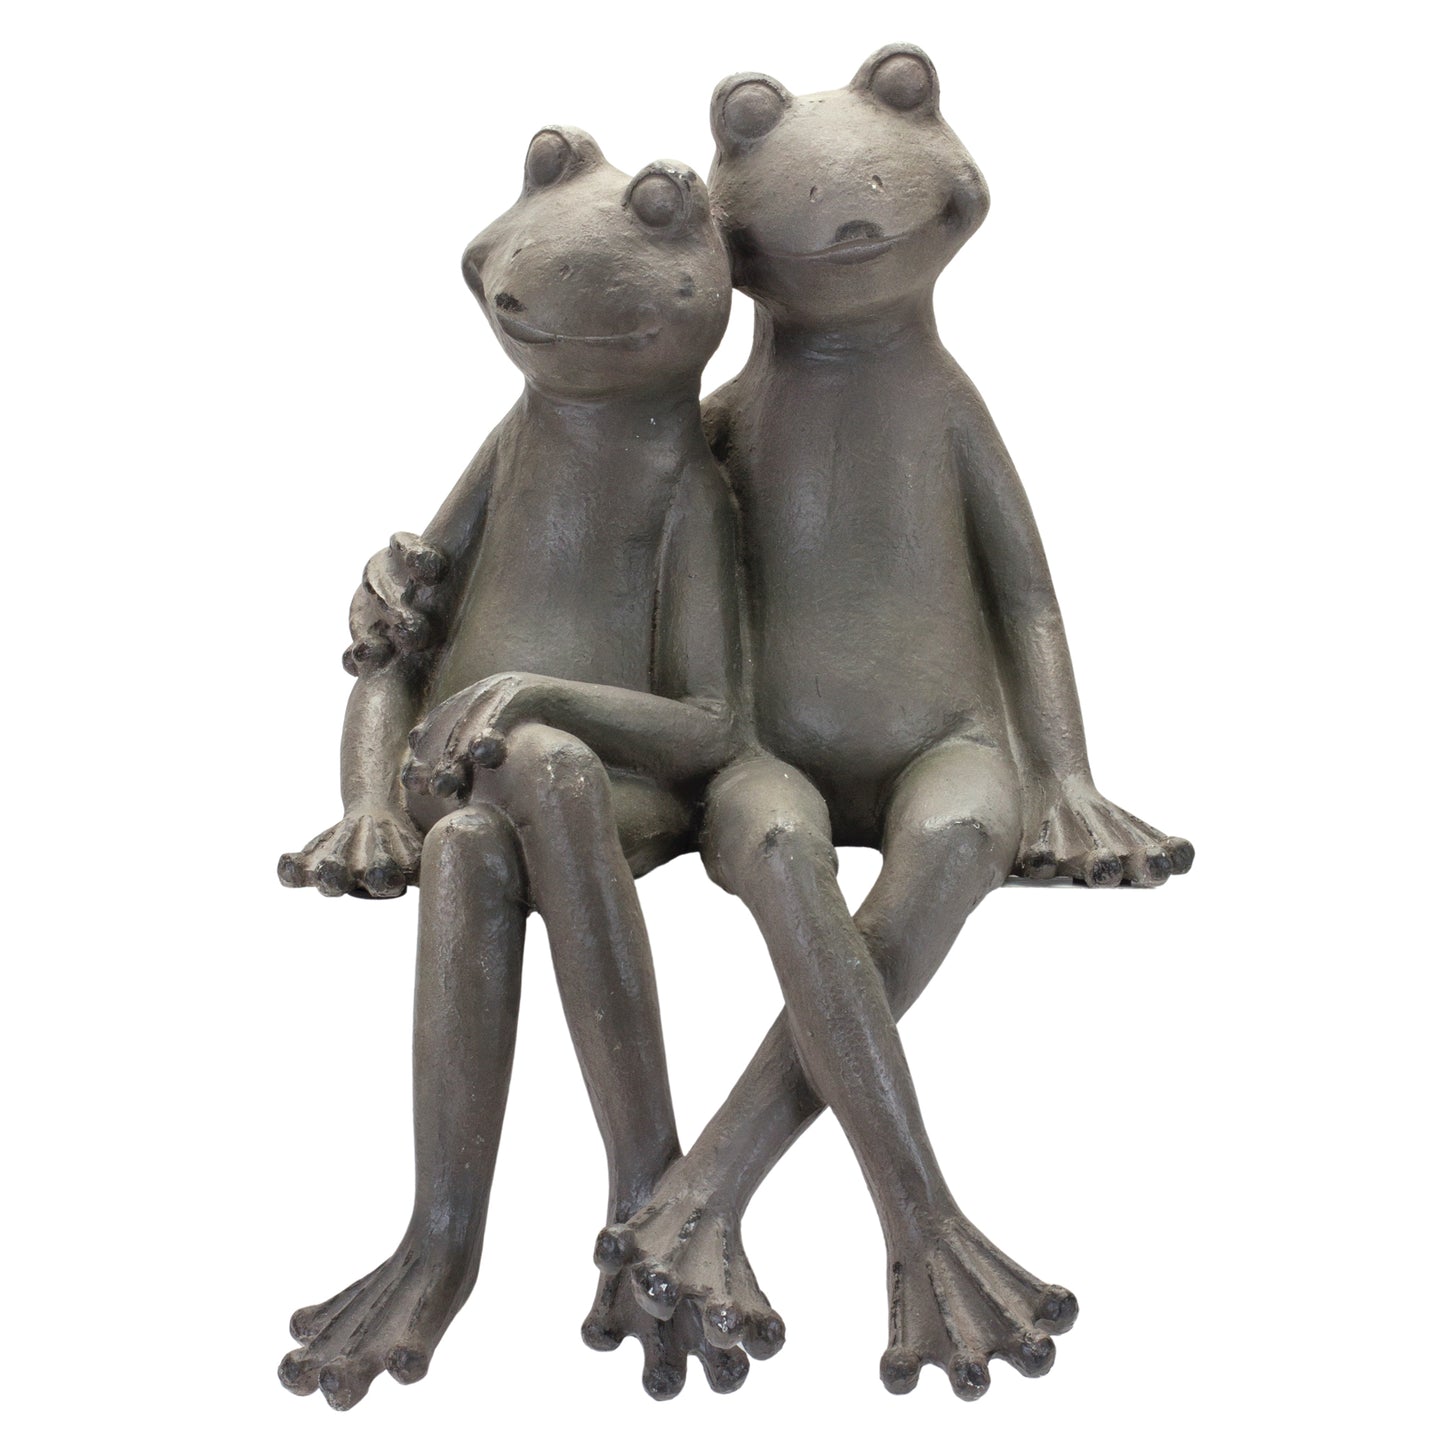 Distressed Stone Sitting Frog Couple Garden Statue 19.5"H